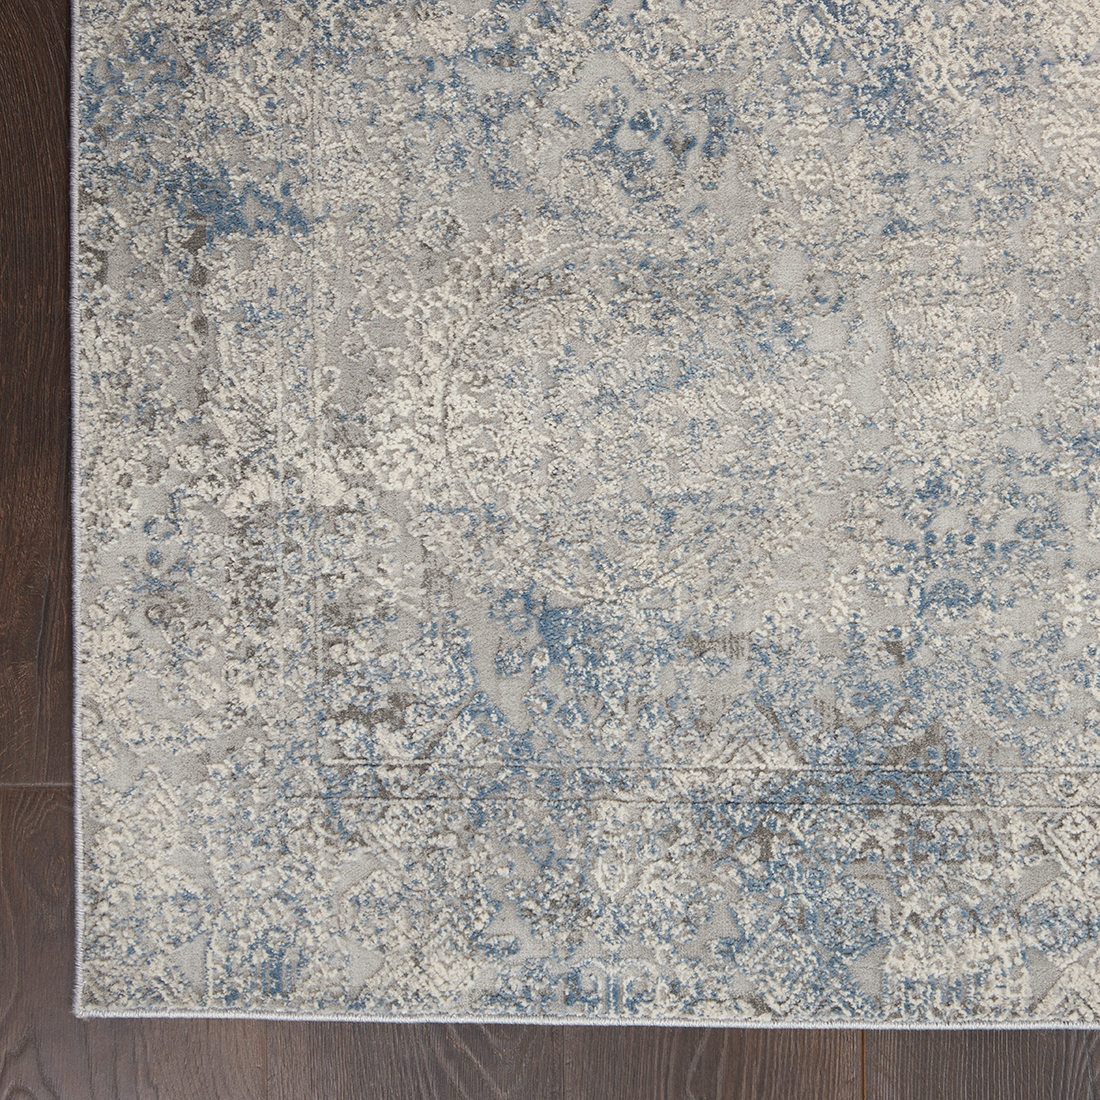 Nourison Rugs - Rustic Textures Rectanglular RUS09 Rug in Ivory / Light Blue - 1.8m x 1.2m